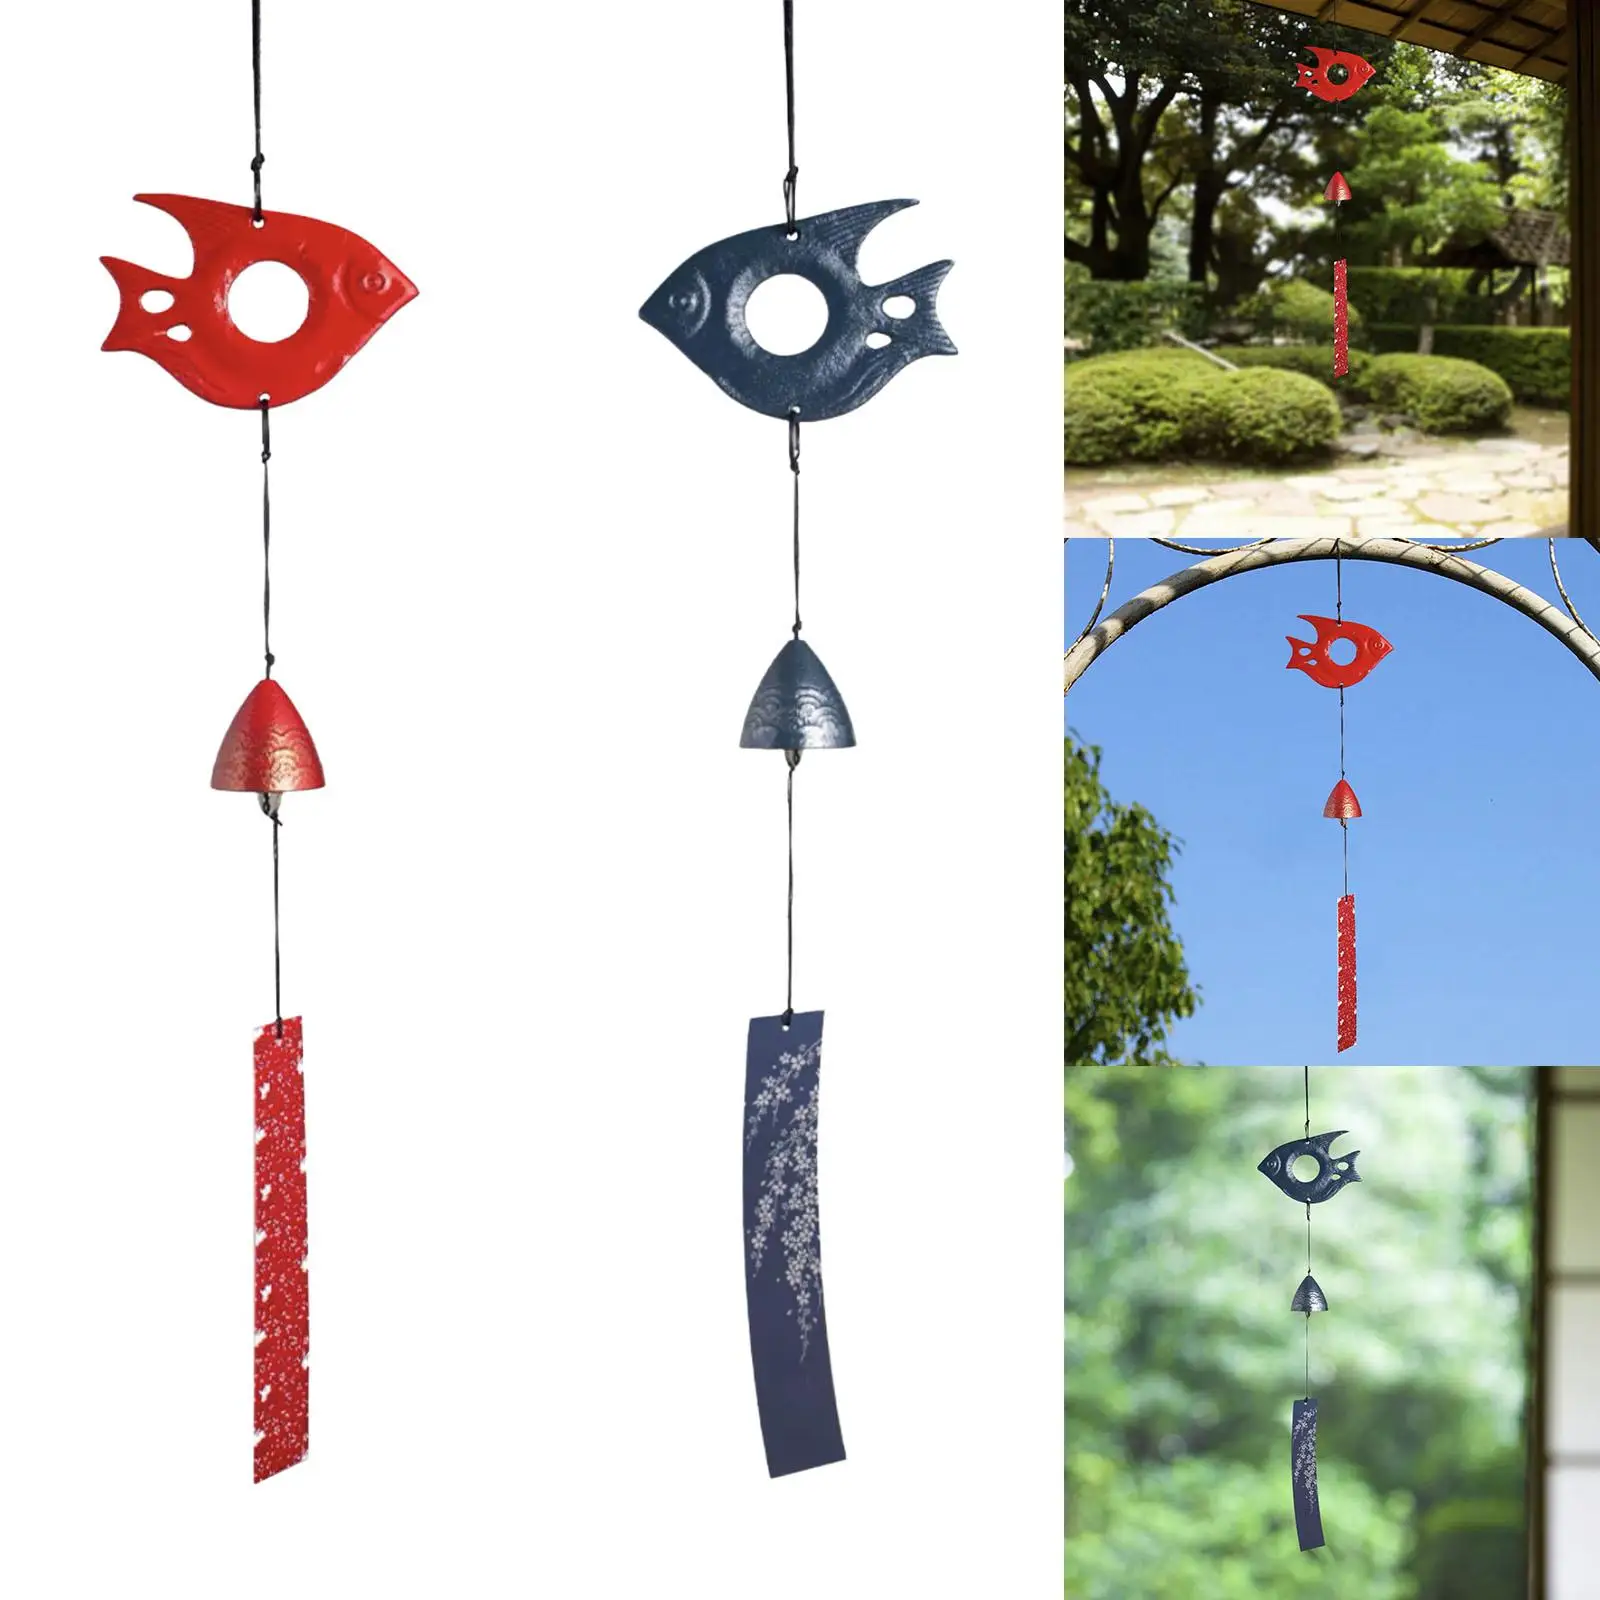 Iron Wind Chimes Hanging Bell Fish Figure Decorative Garden Windchime Pendant for Windows Patio Home Outside Festival Gifts